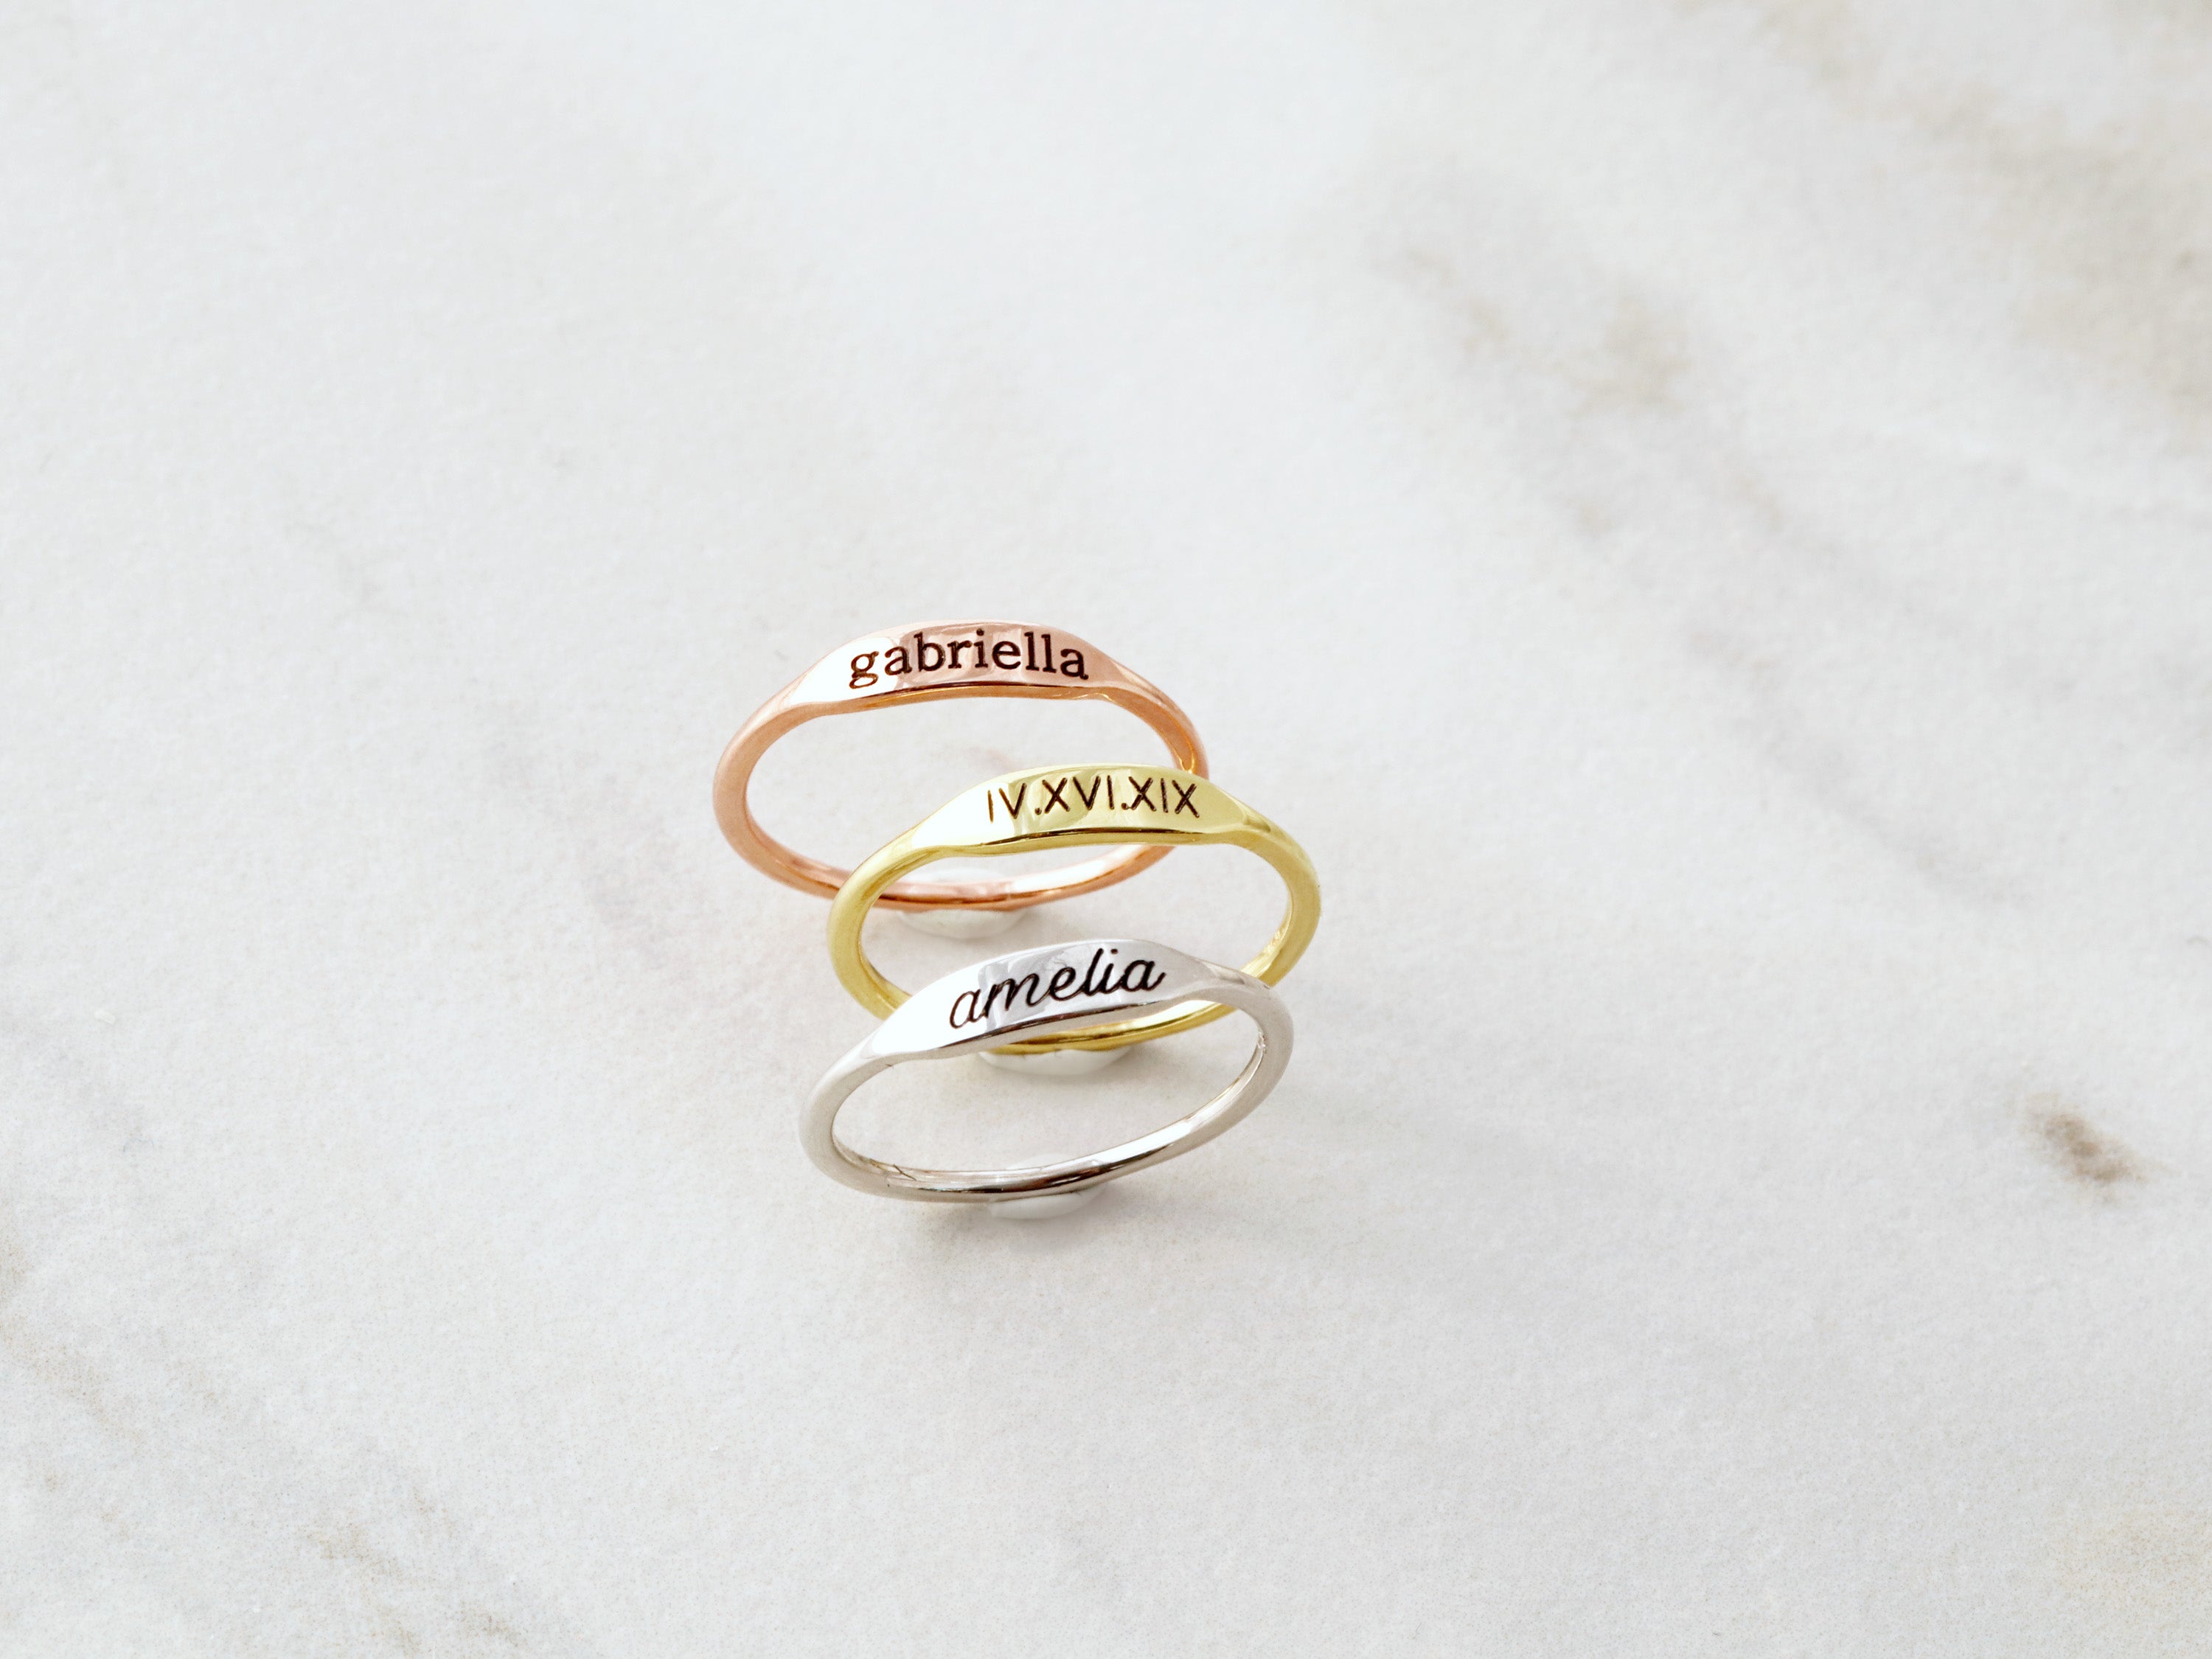 2021 Personalized Name Ring Gold/ Rose Gold/ Silver With Heart, Custom Name  Ring Birthday Gift Christmas Gifts Ring For Women - Customized Rings -  AliExpress